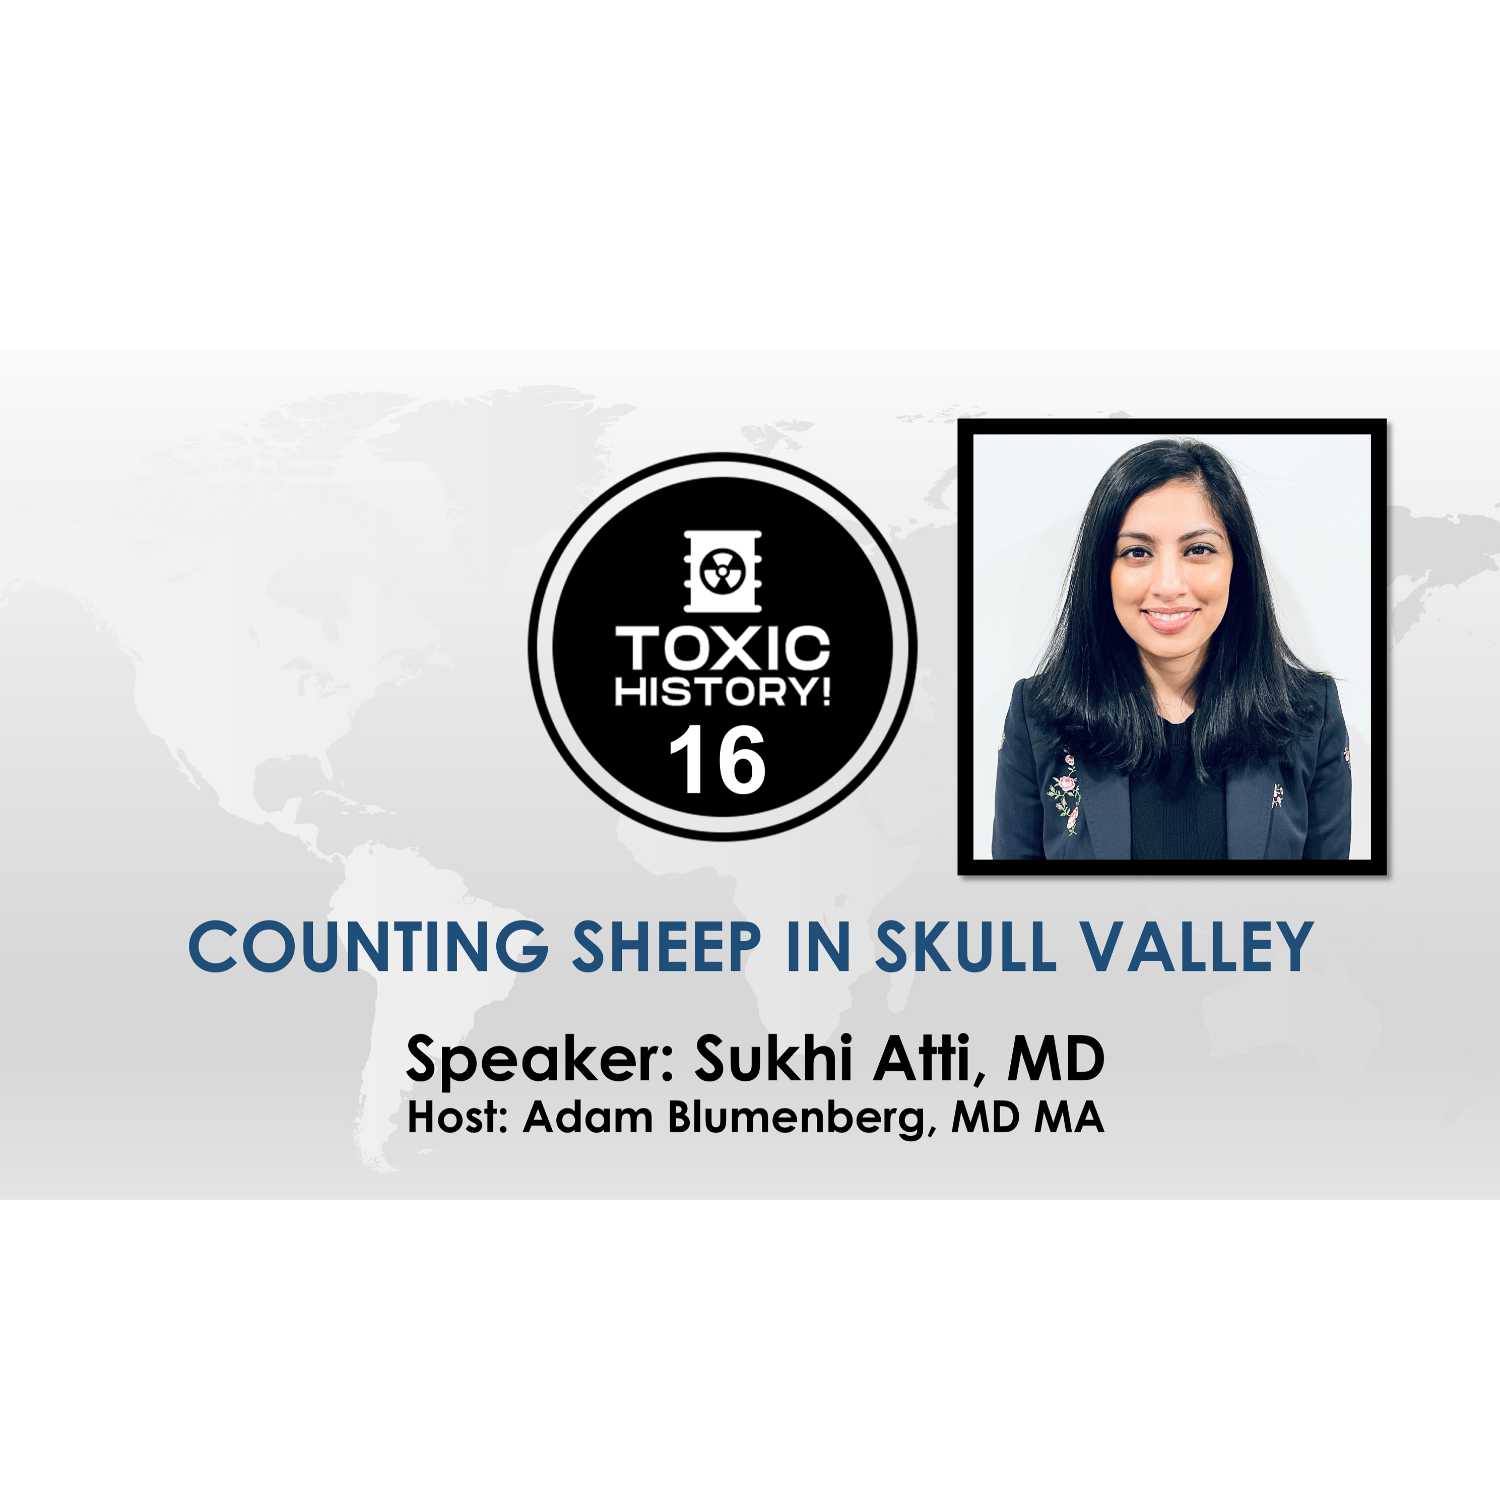 Counting Sheep in Skull Valley